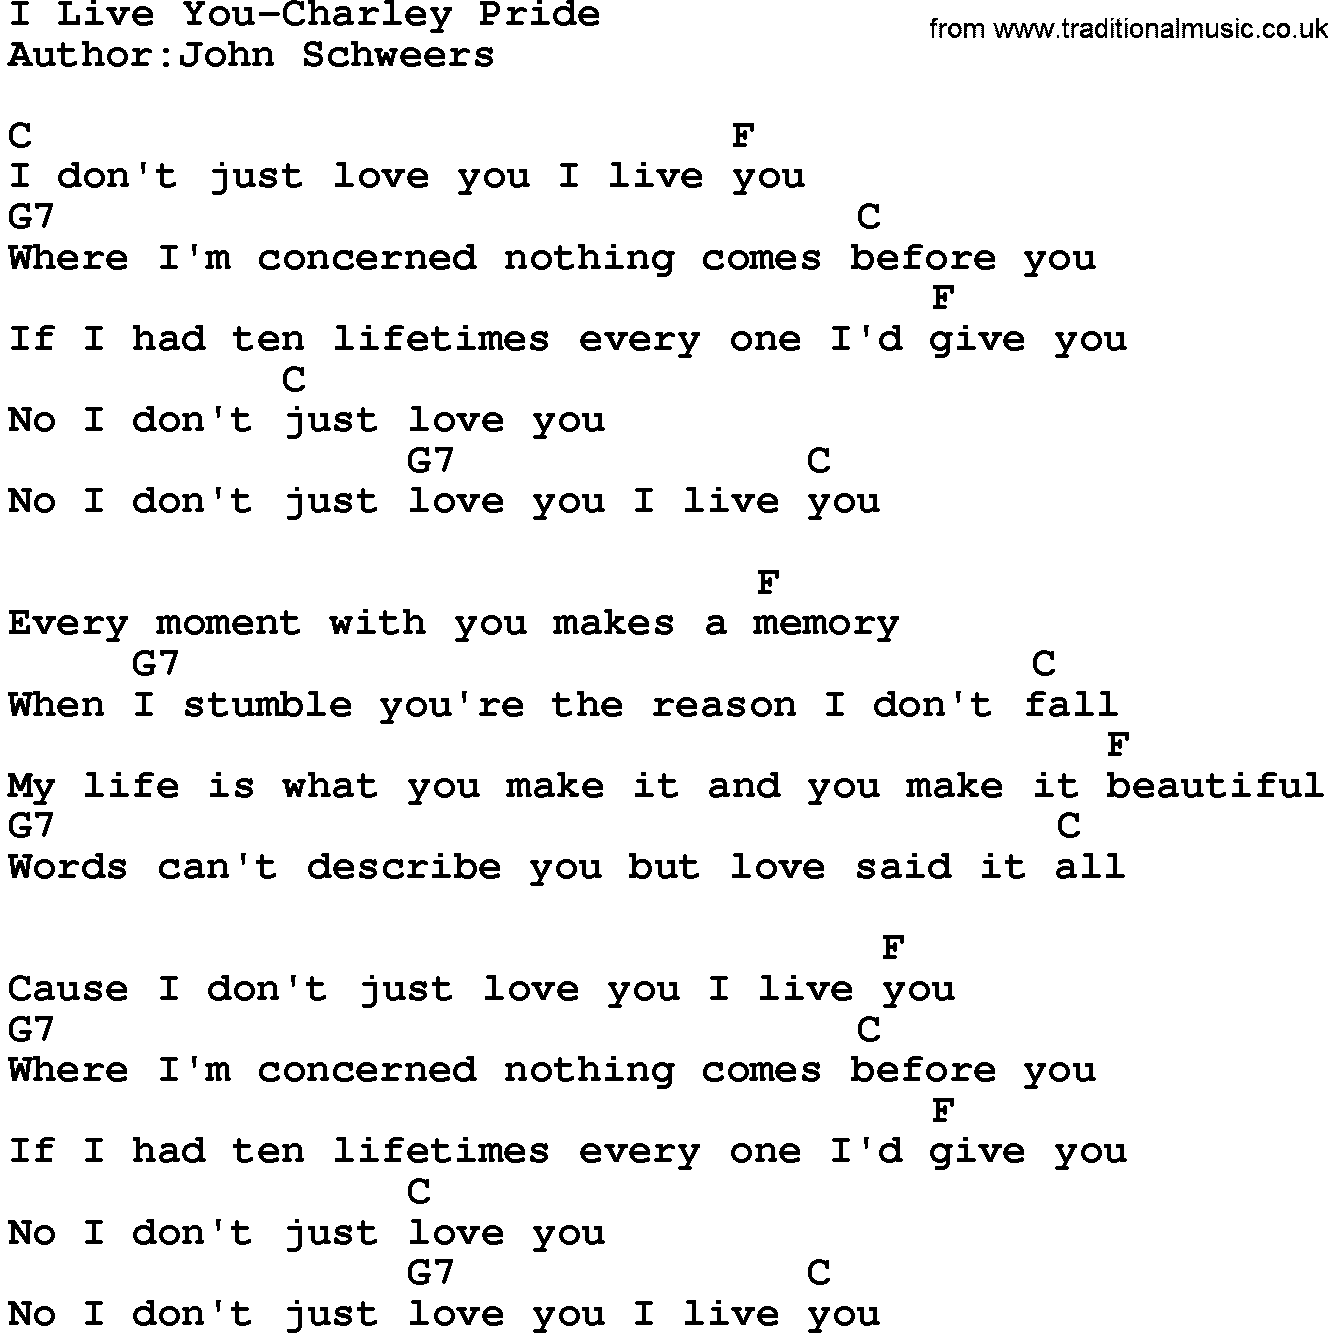 Country music song: I Live You-Charley Pride lyrics and chords